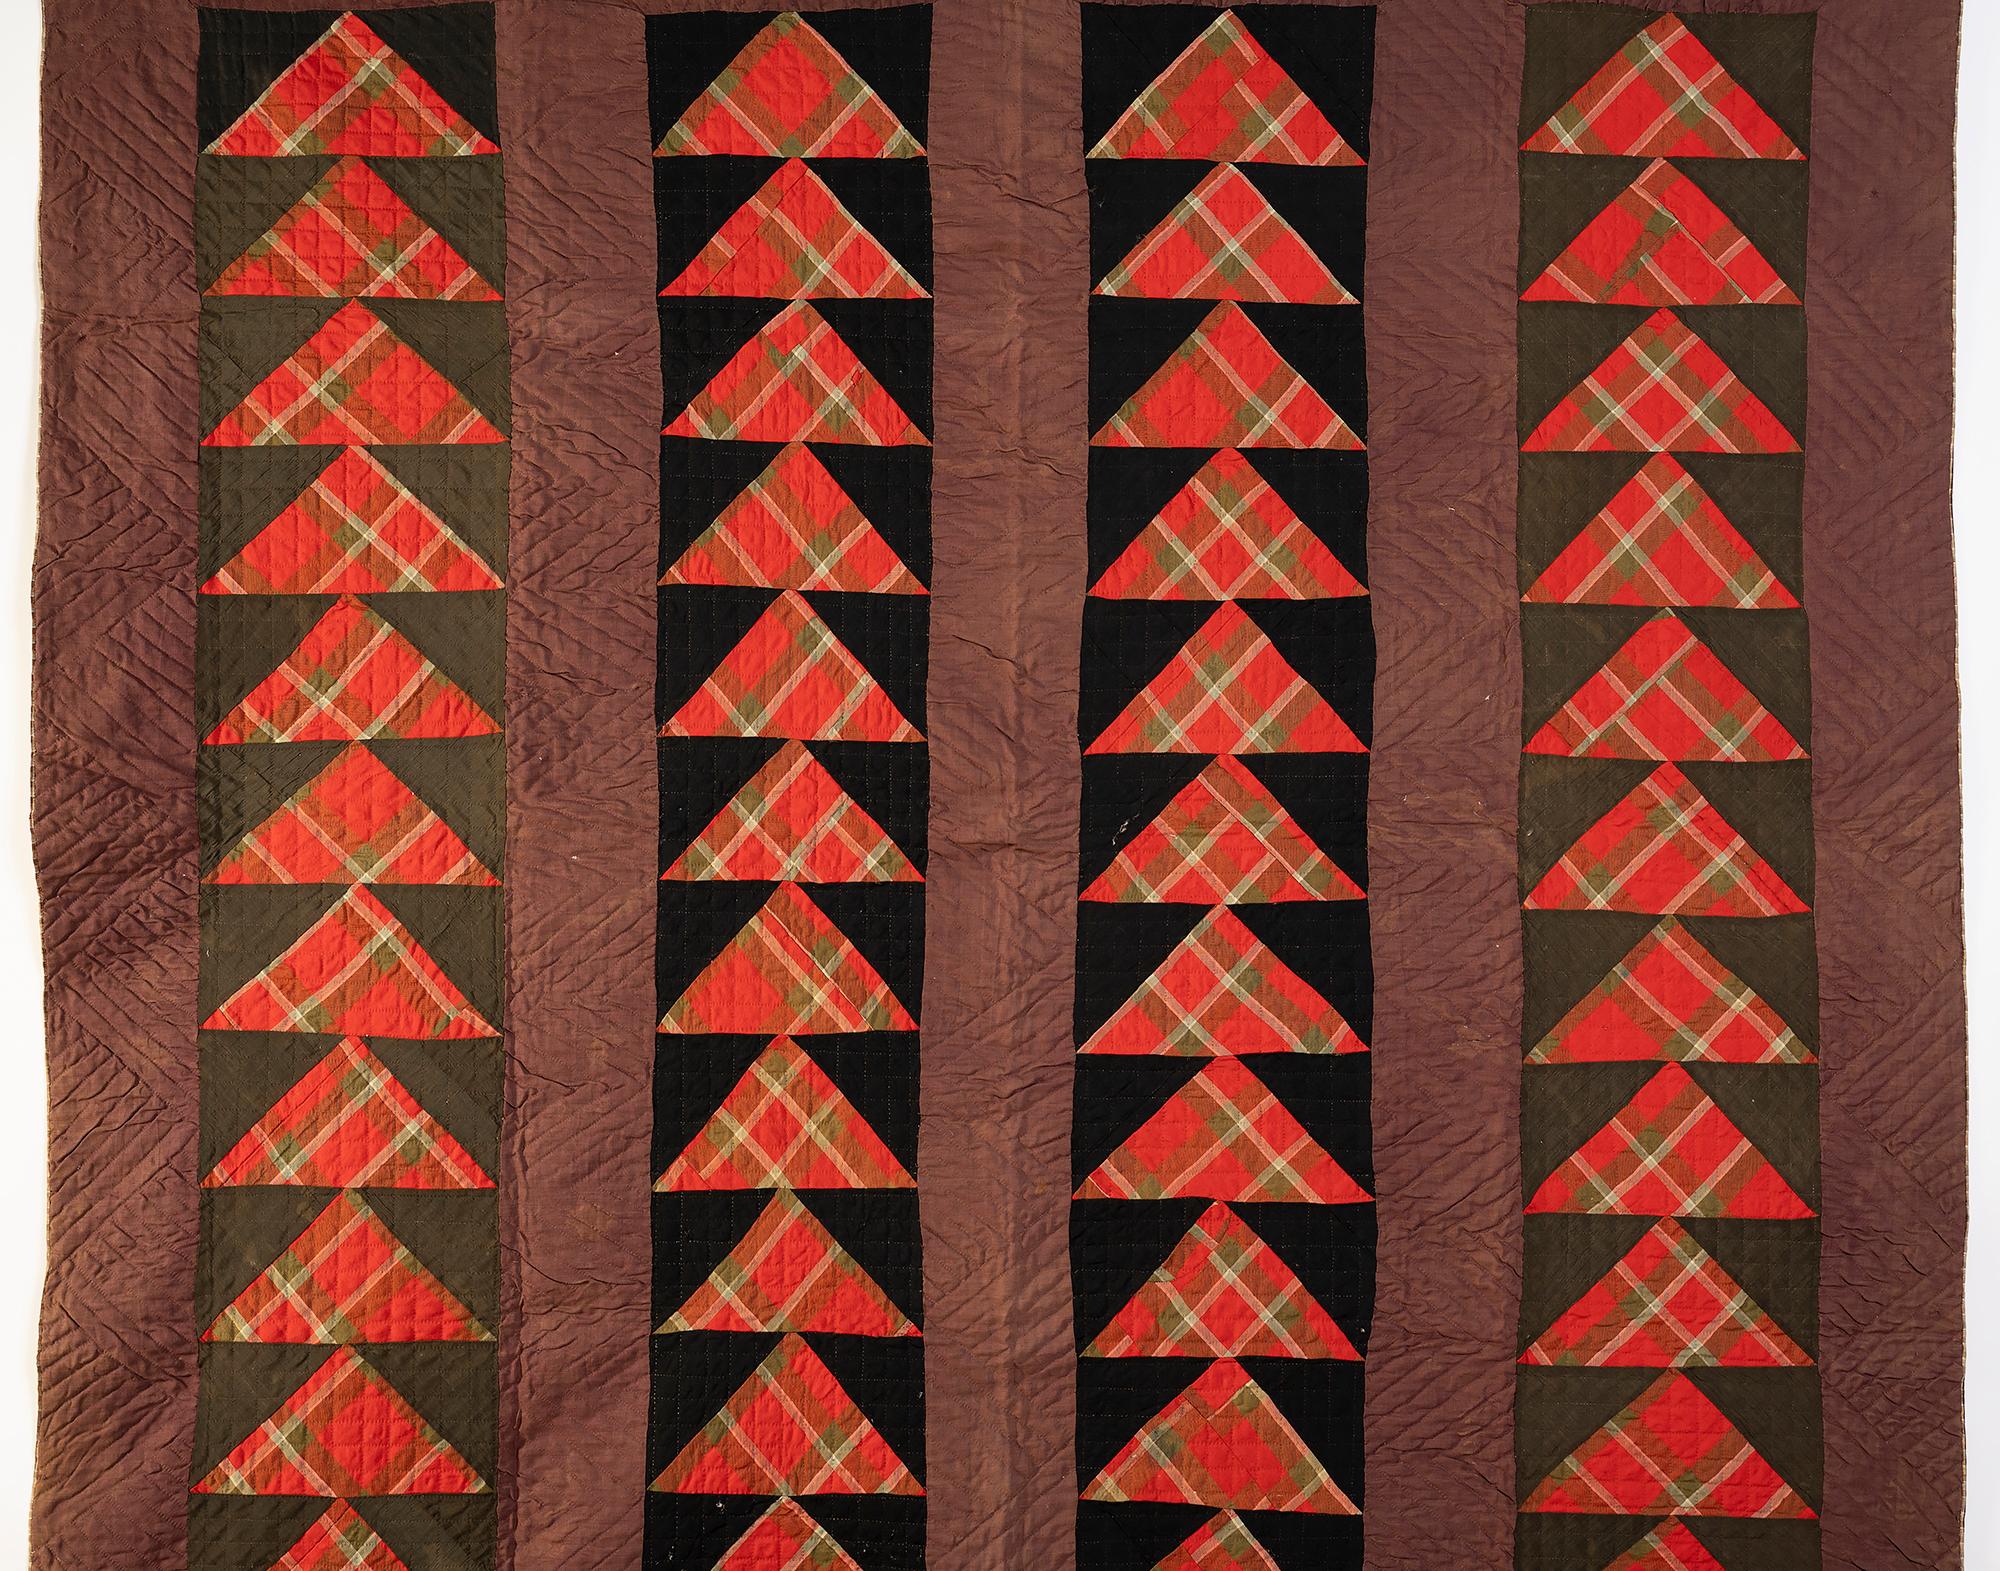 Wild goose chase quilt made of fairly heavy wool fabrics with a plaid cotton backing. Made circa 1870; Maryland origin. The plaid triangles against the solid color bars give the illusion of tremendous movement to the geese. Measures: 85